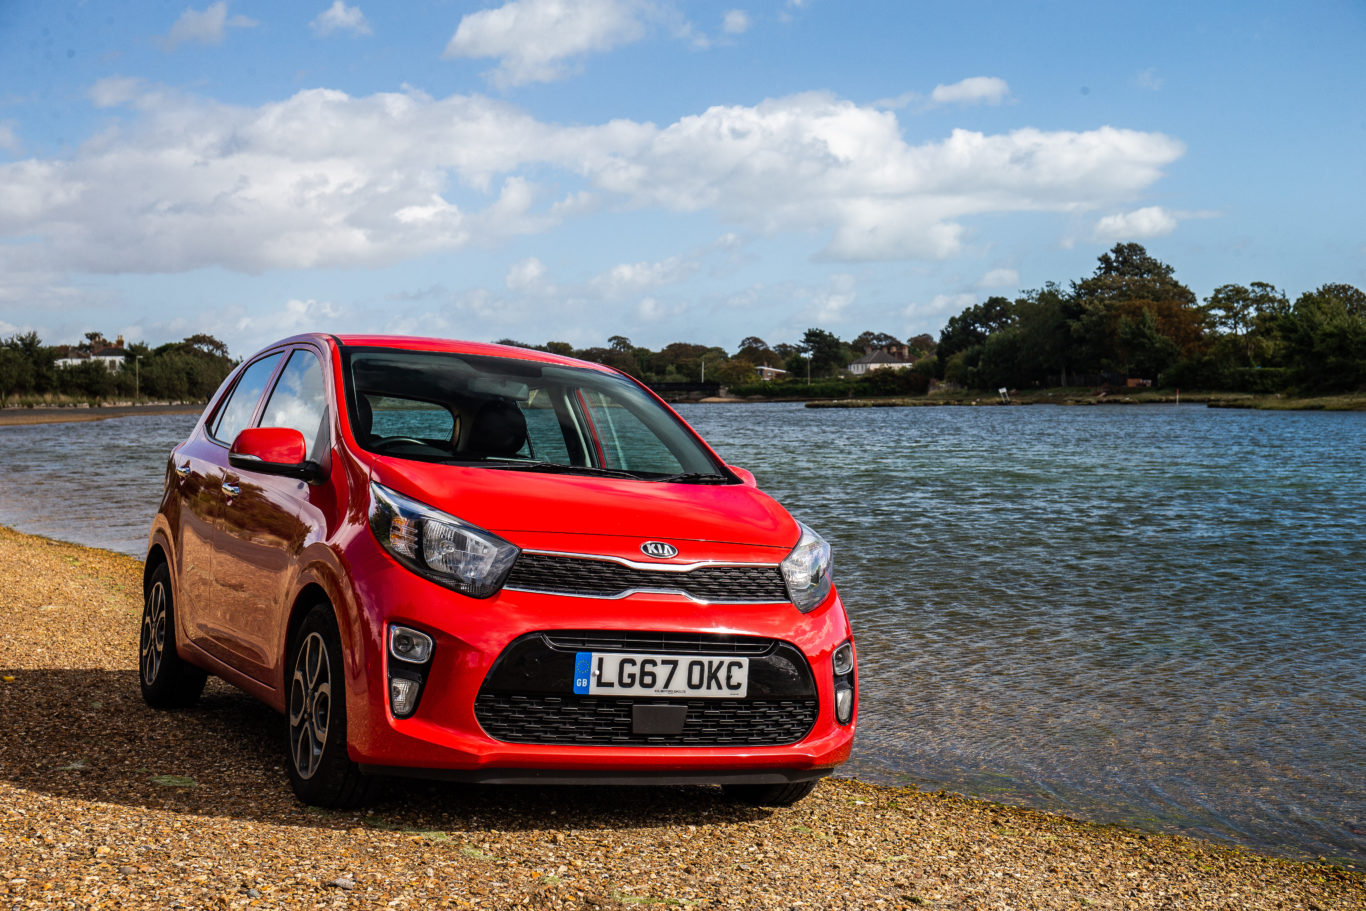 Kia's 'Tiger Nose' grille is prominent at the front of the Picanto